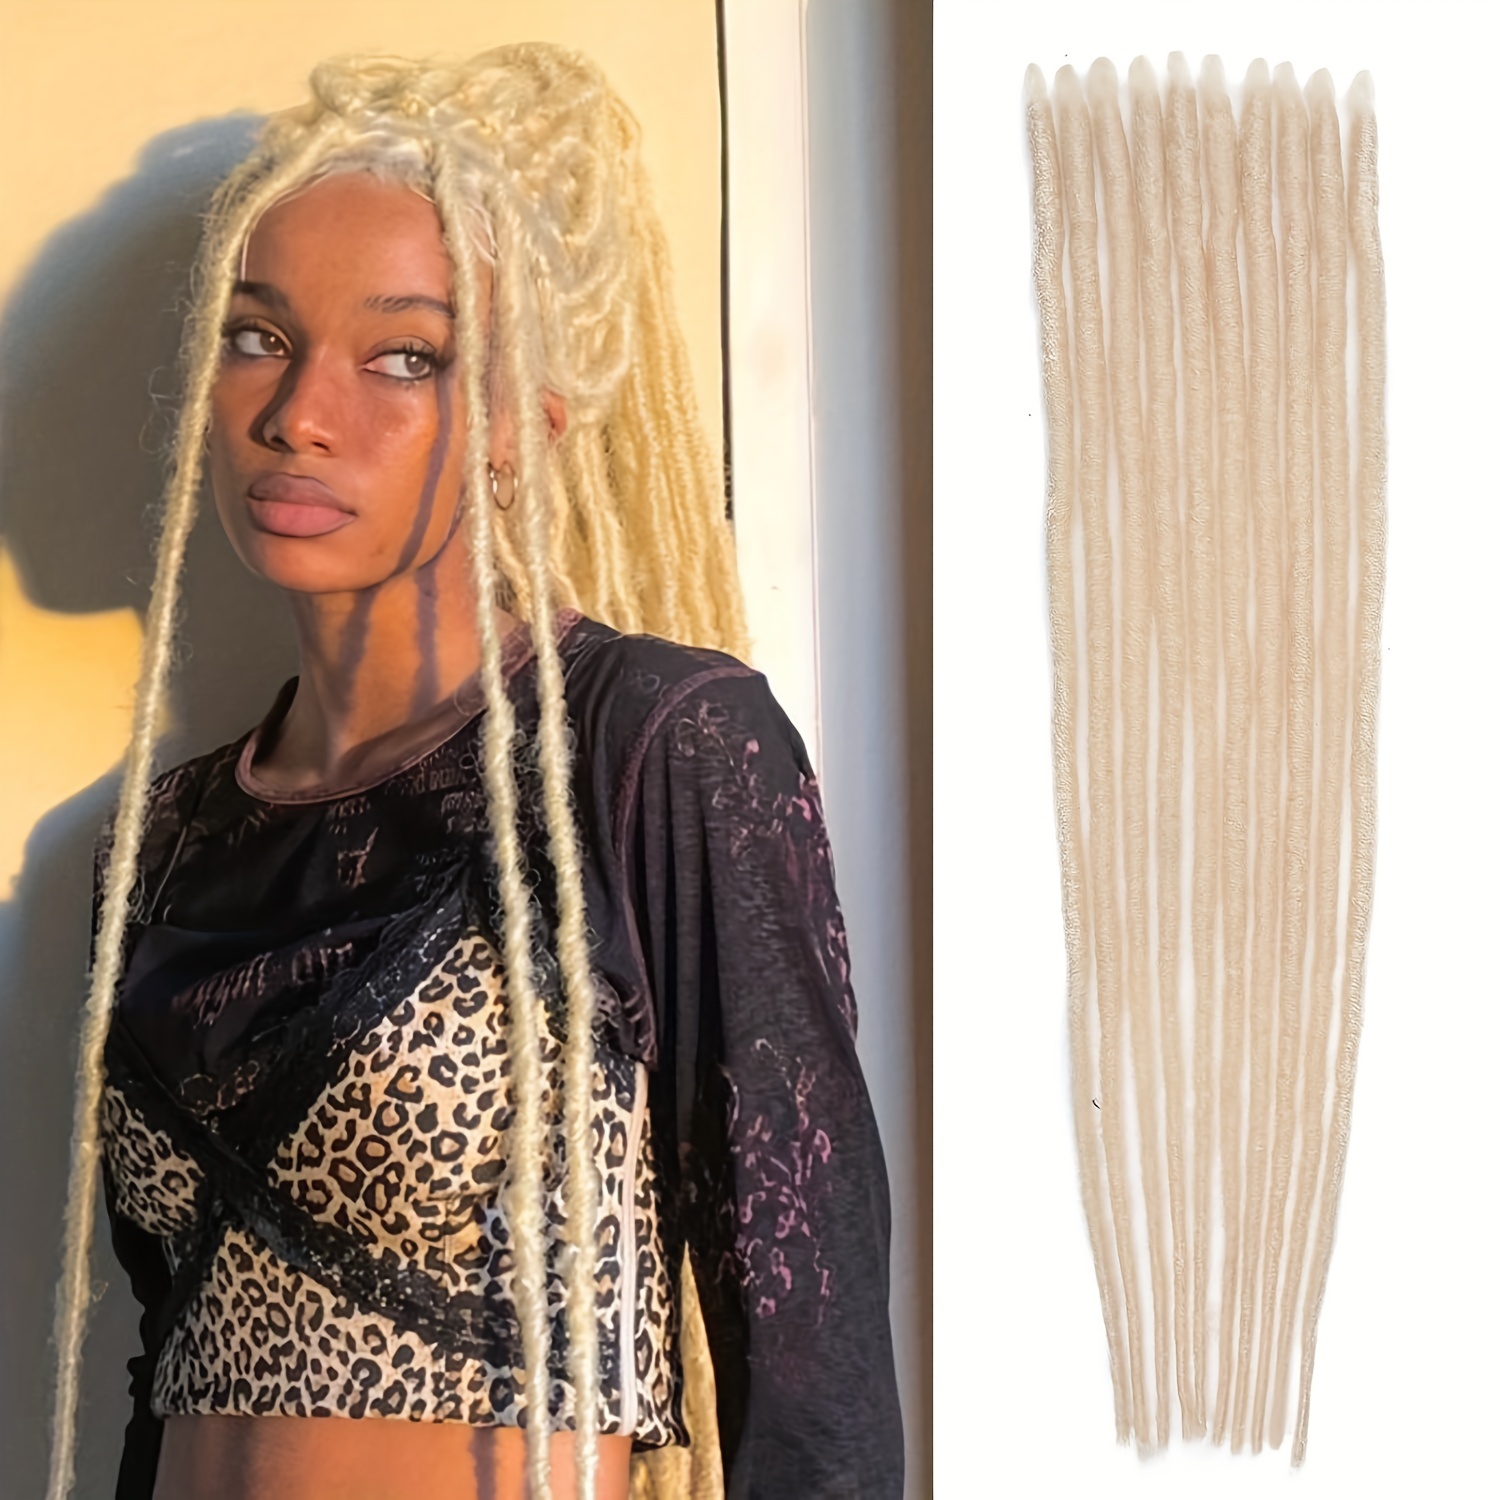 Loc Crochet Extensions 10 Strands Synthetic Dreadlocks Crochet Hair  Extension Long Straight Braiding Hair Black/blonde Color Dreads Crochet  Locs Hair Hip-hop Synthetic Hair Crochet Braiding Hair Extensions For Women  Perfect For Daily